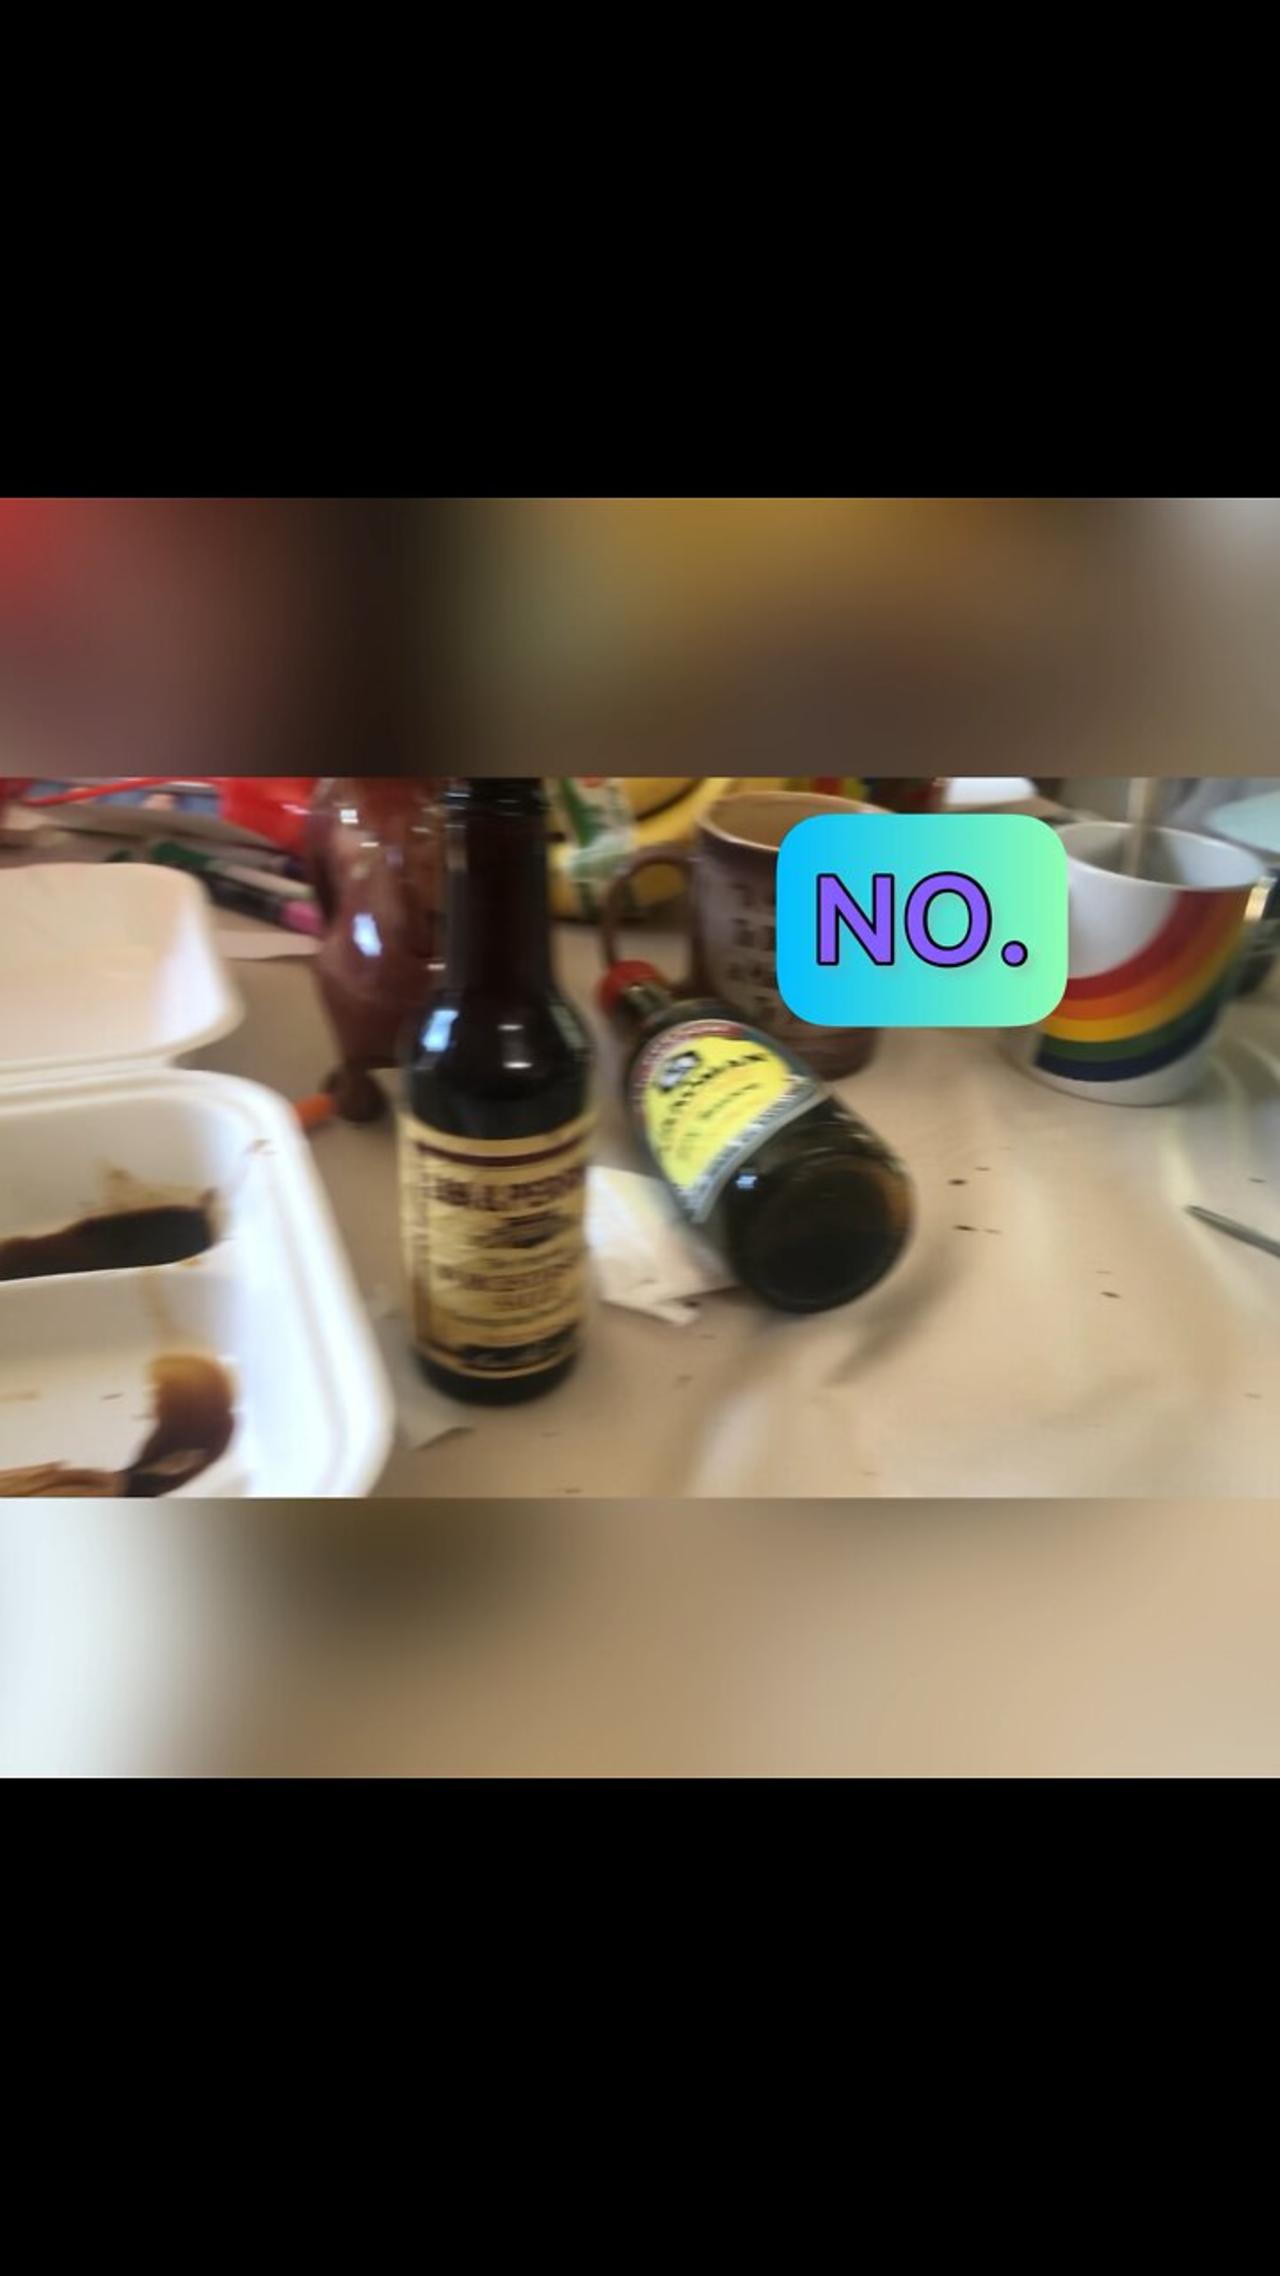 American Soy Sauce has no SOY! 🫡